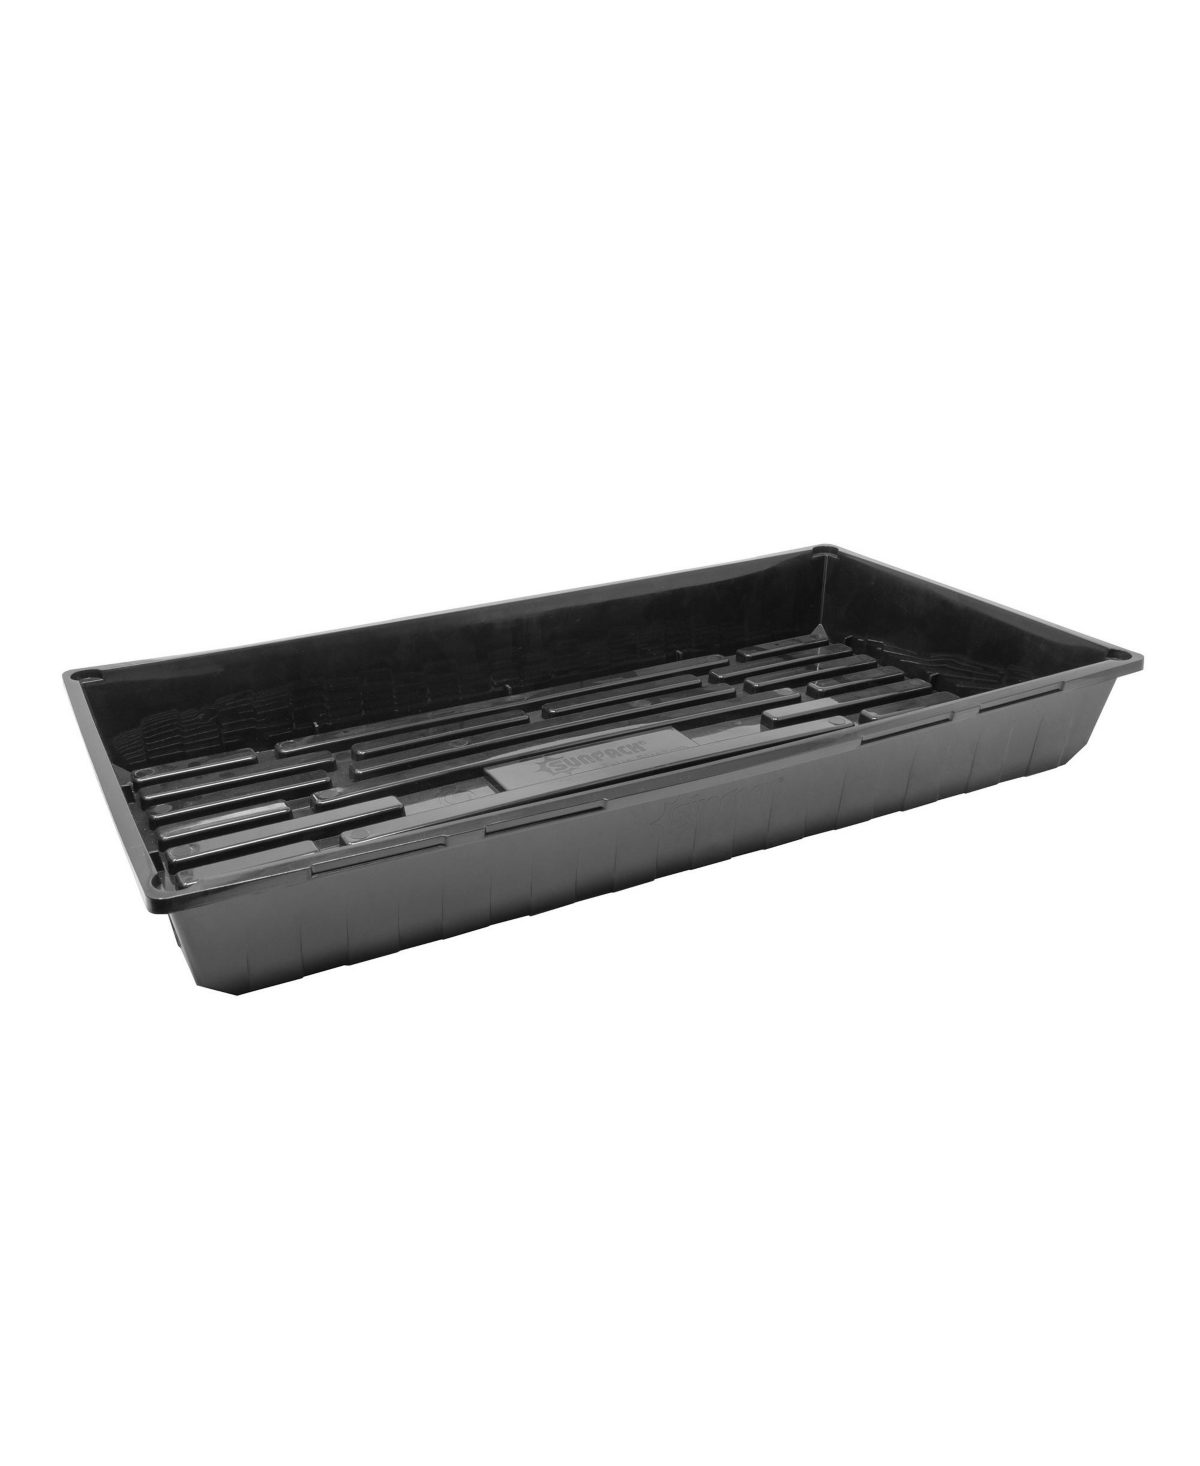 Indoor Gardening Reinforced Plastic Seed Propagation Tray, 10 x 20 Inches, Black - Black